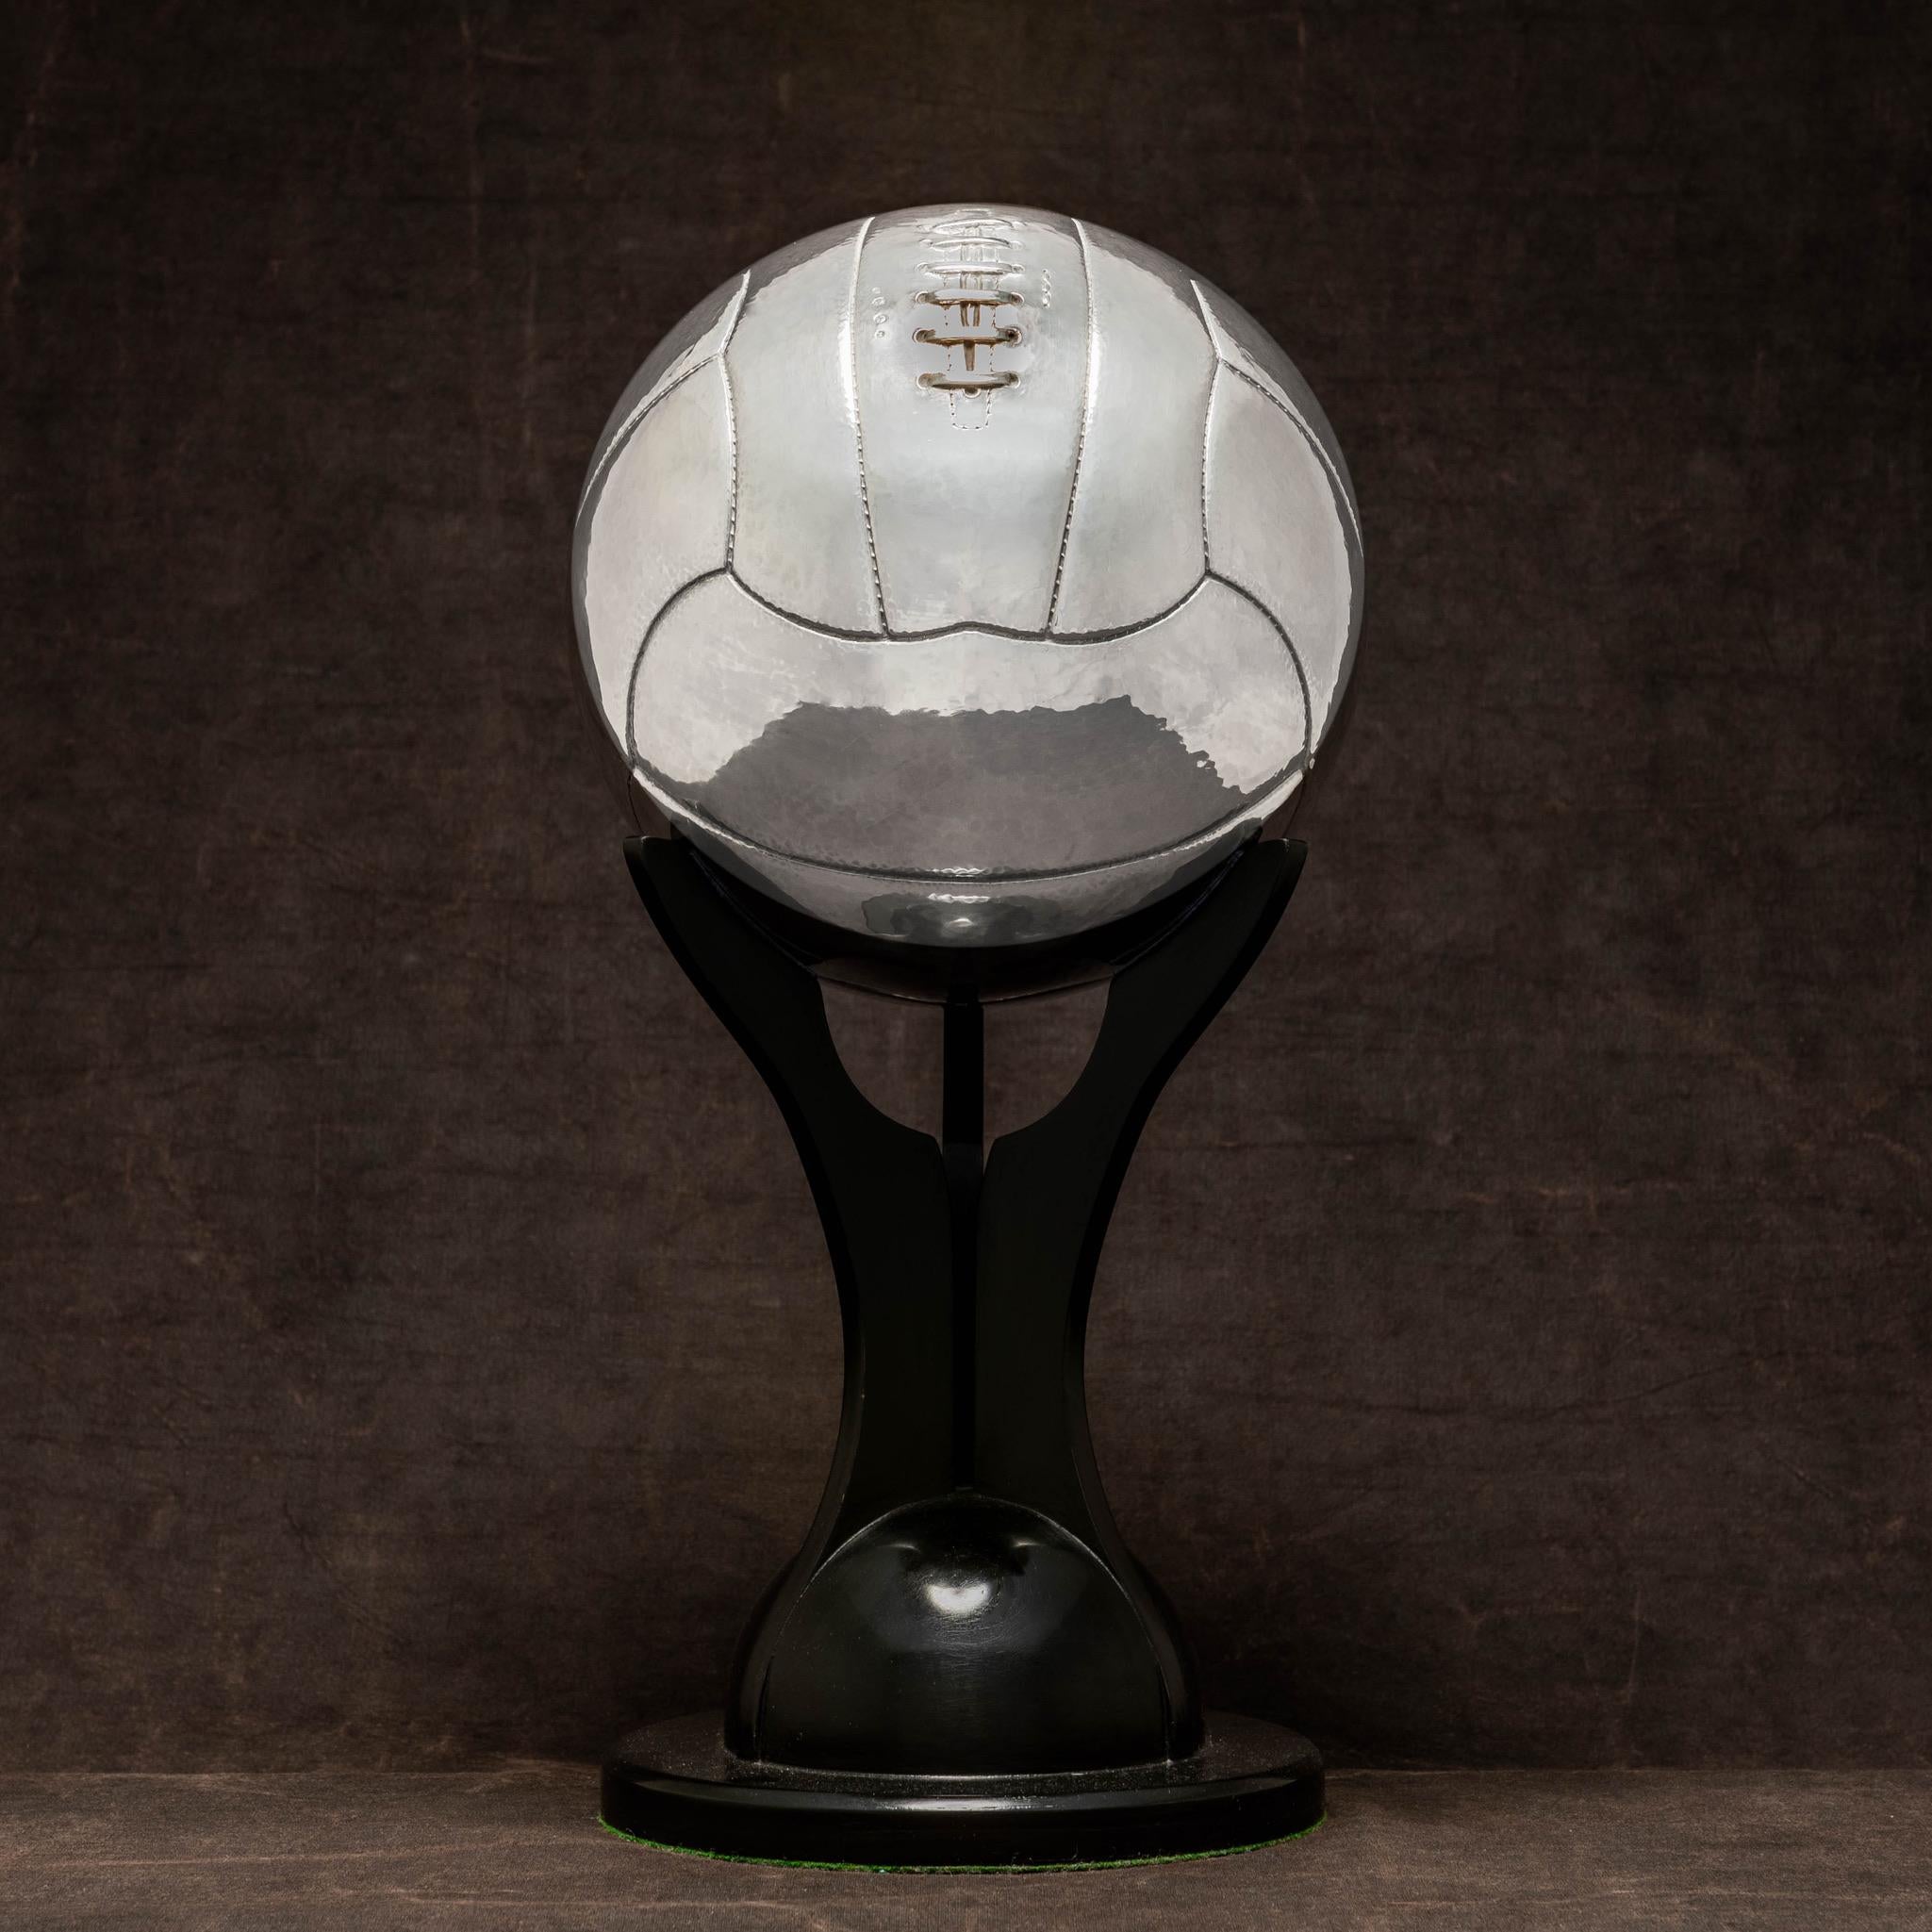 An exceptional life-size sterling silver football with gently hammered surface and skilfully detailed lacing. The ball is very tactile and we have made a bespoke ebonised stand so that the ball can easily be removed and handled. With silver marks